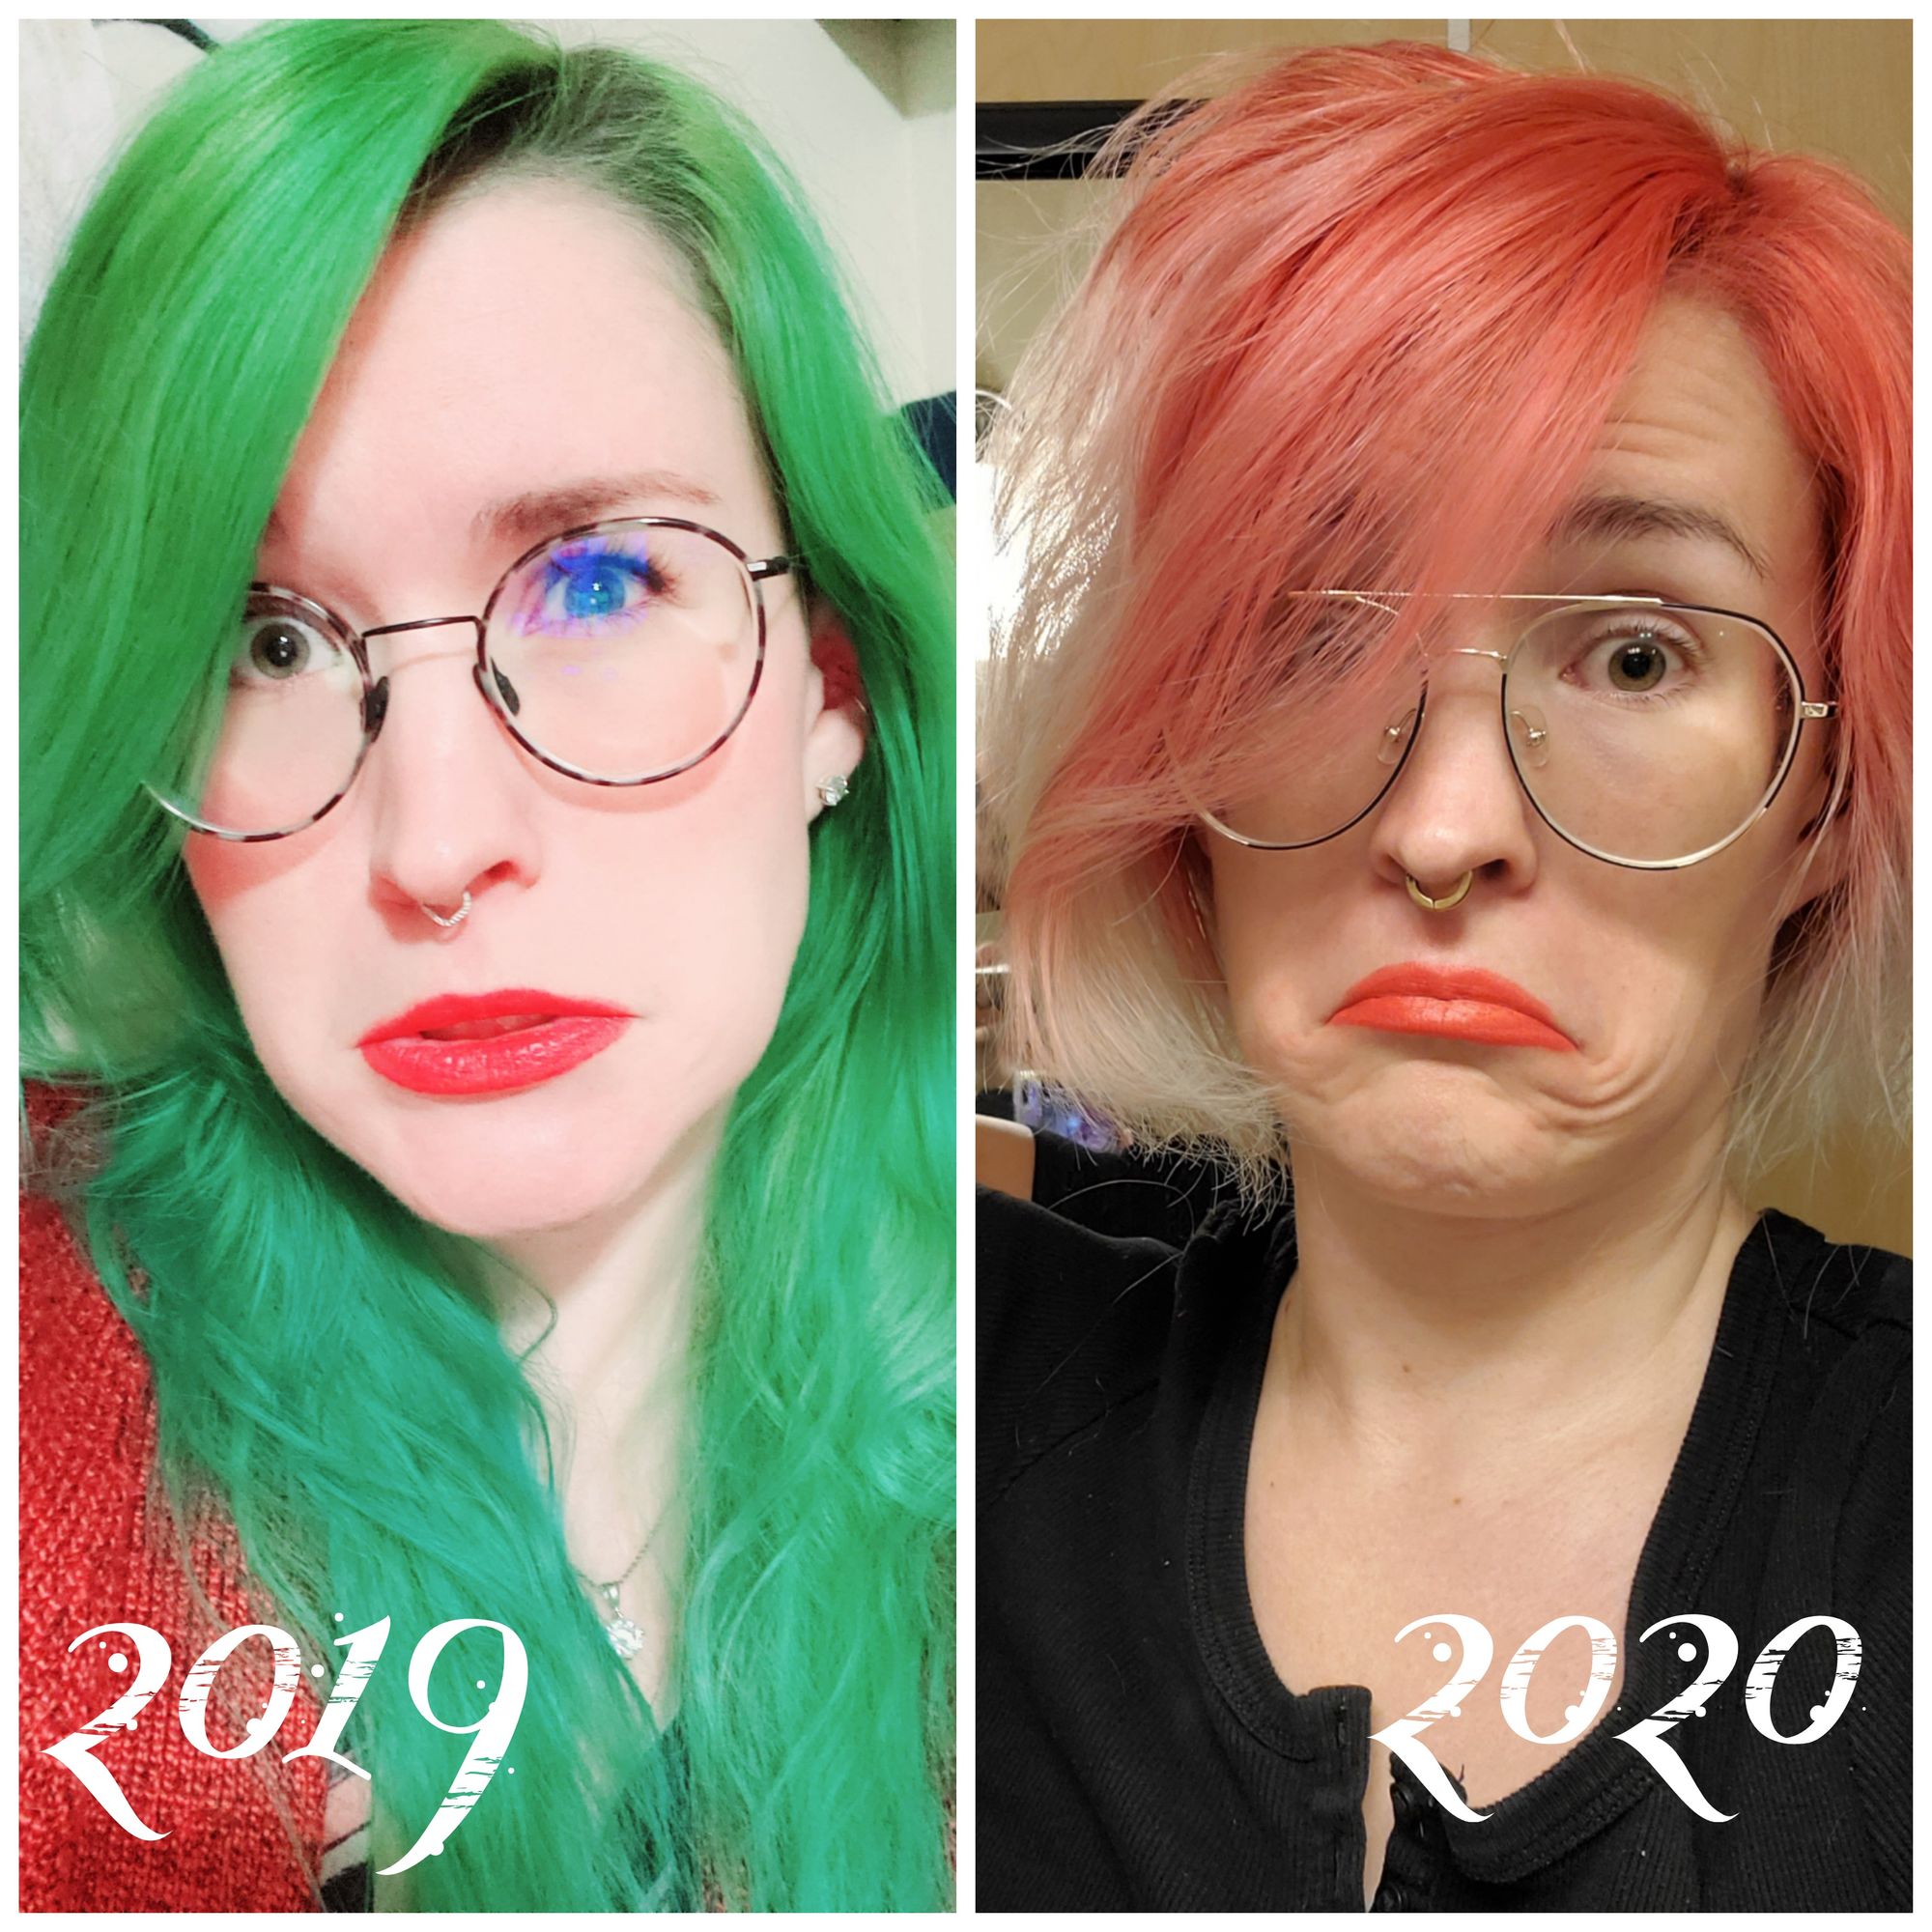 Image of me, Cakelin, on the left in 2019 and right in 2020. I am a light skinned/white, femme, non-binary person with a septum, glasses and green eyes. In both pictures I am making a funny expression, pulling my mouth downwards and out. 2019 me has long bright green hair, red lip stick and thin tortoiseshell oval glasses. 2020 me has peach/pink chin length hair with orange lipstick, wearing gold and black geometric glasses in an aviator style.